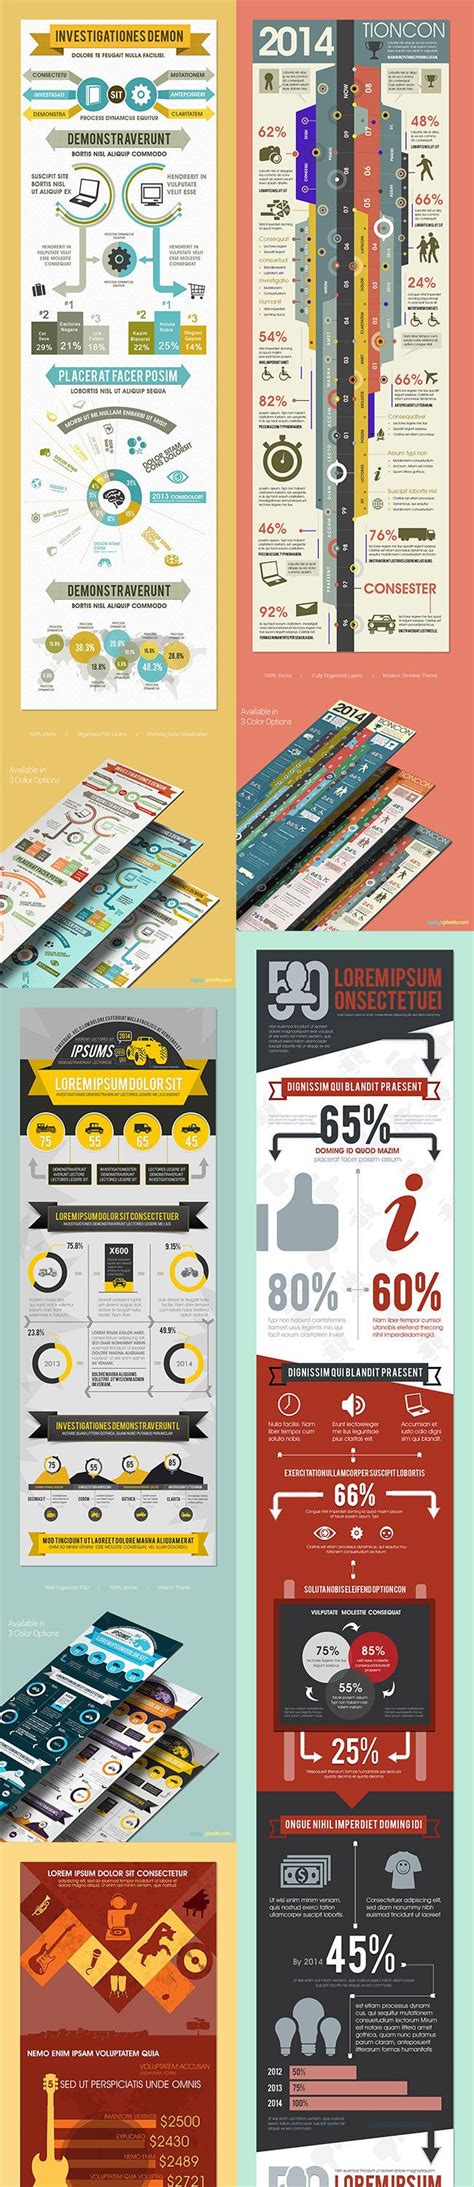 Mega Bundle Of 105 Incredible Vector Infographic Templates Only 27